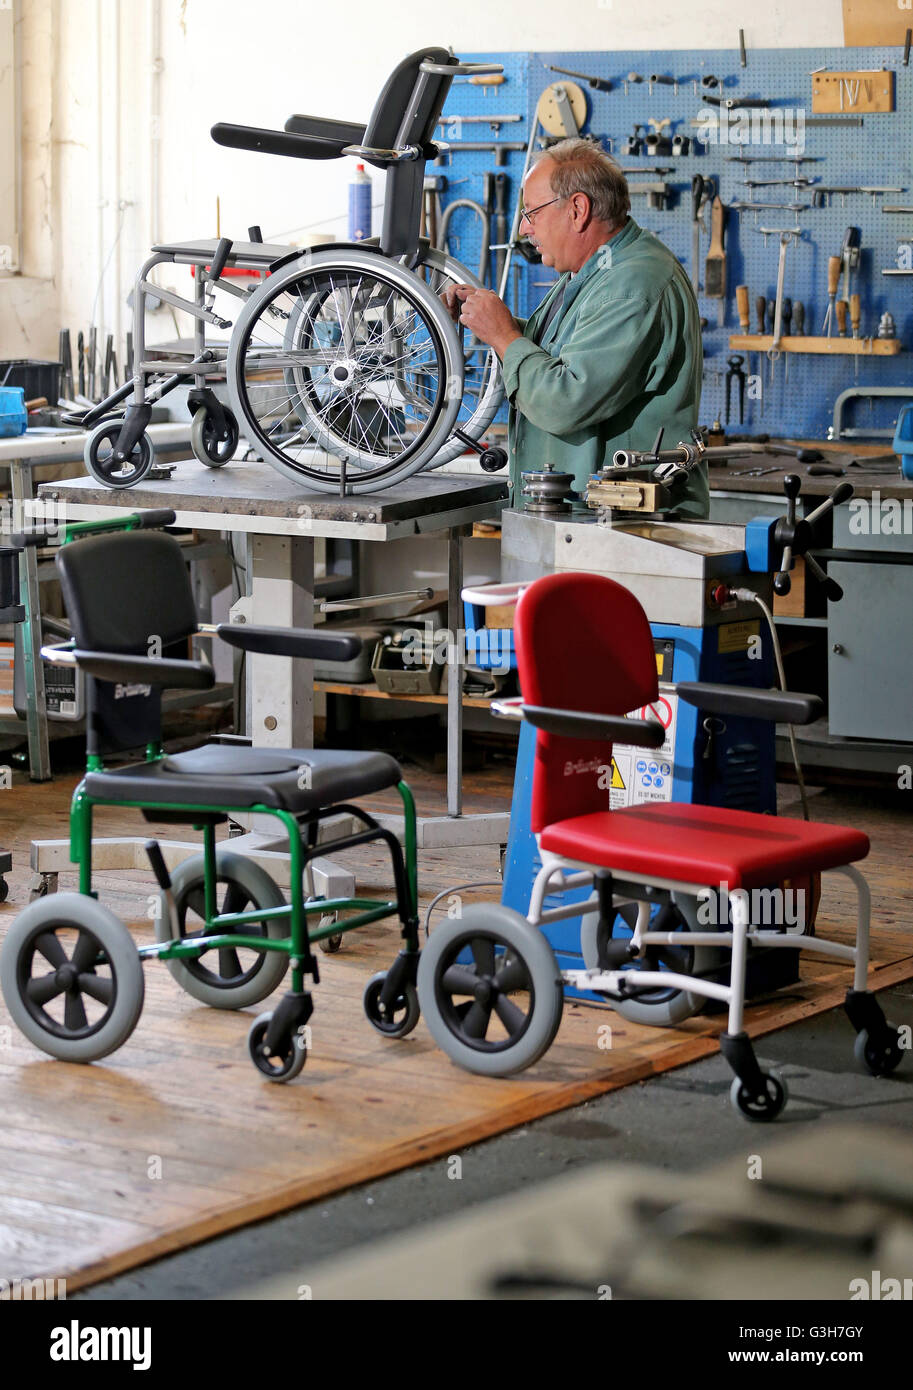 Leipzig, Germany. 20th June, 2016. Matthias Doebel puts together the wheelchair 'RZ-Mini' in the company wheelchair construction Braeunig in Leipzig, Germany, 20 June 2016. The small firm with only six employees builds 500 wheelchairs per year on average - half of them are made to measure. The business started off in the GDR with a wheelchair that had a width of only 51 centimetres due to tight measurements in newly built flats at that time. Nowadays, the reverse is sold as wellt: the RS Jumbo serves for people that weigh up to 325 kg. Photo: Jan Woitas/dpa/Alamy Live News Stock Photo